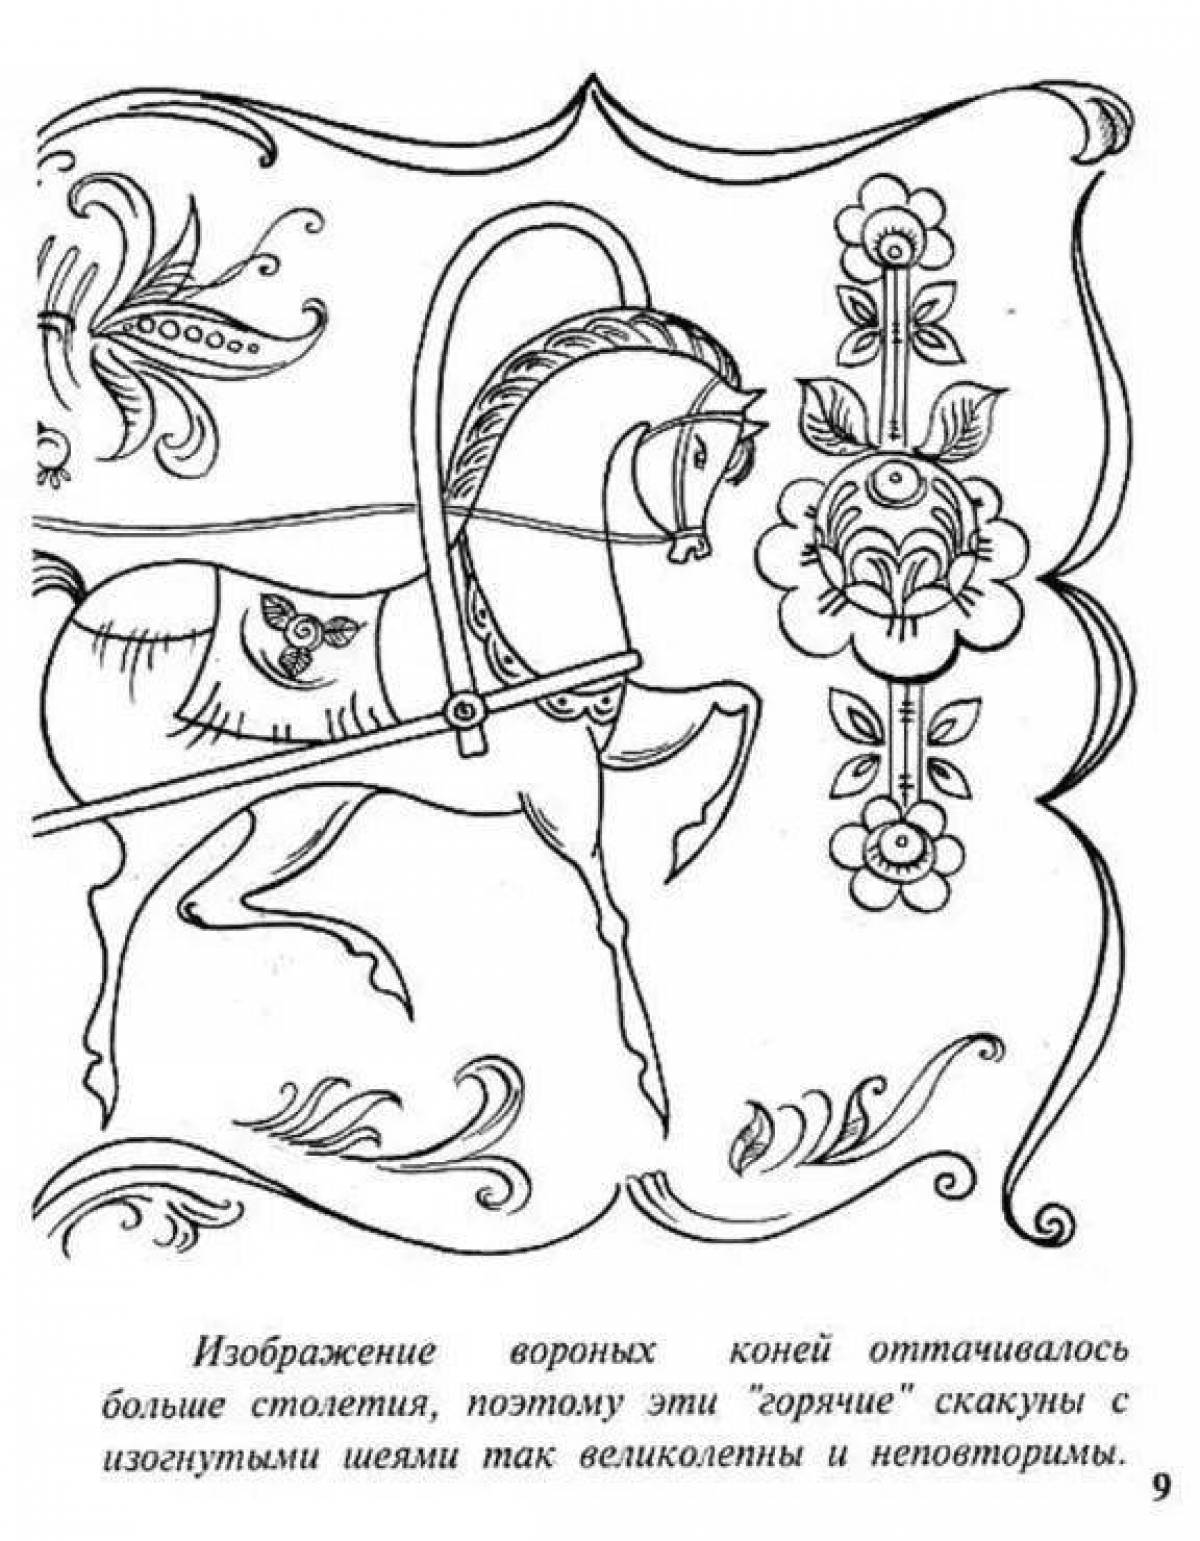 Coloring page wild Gorodets horse